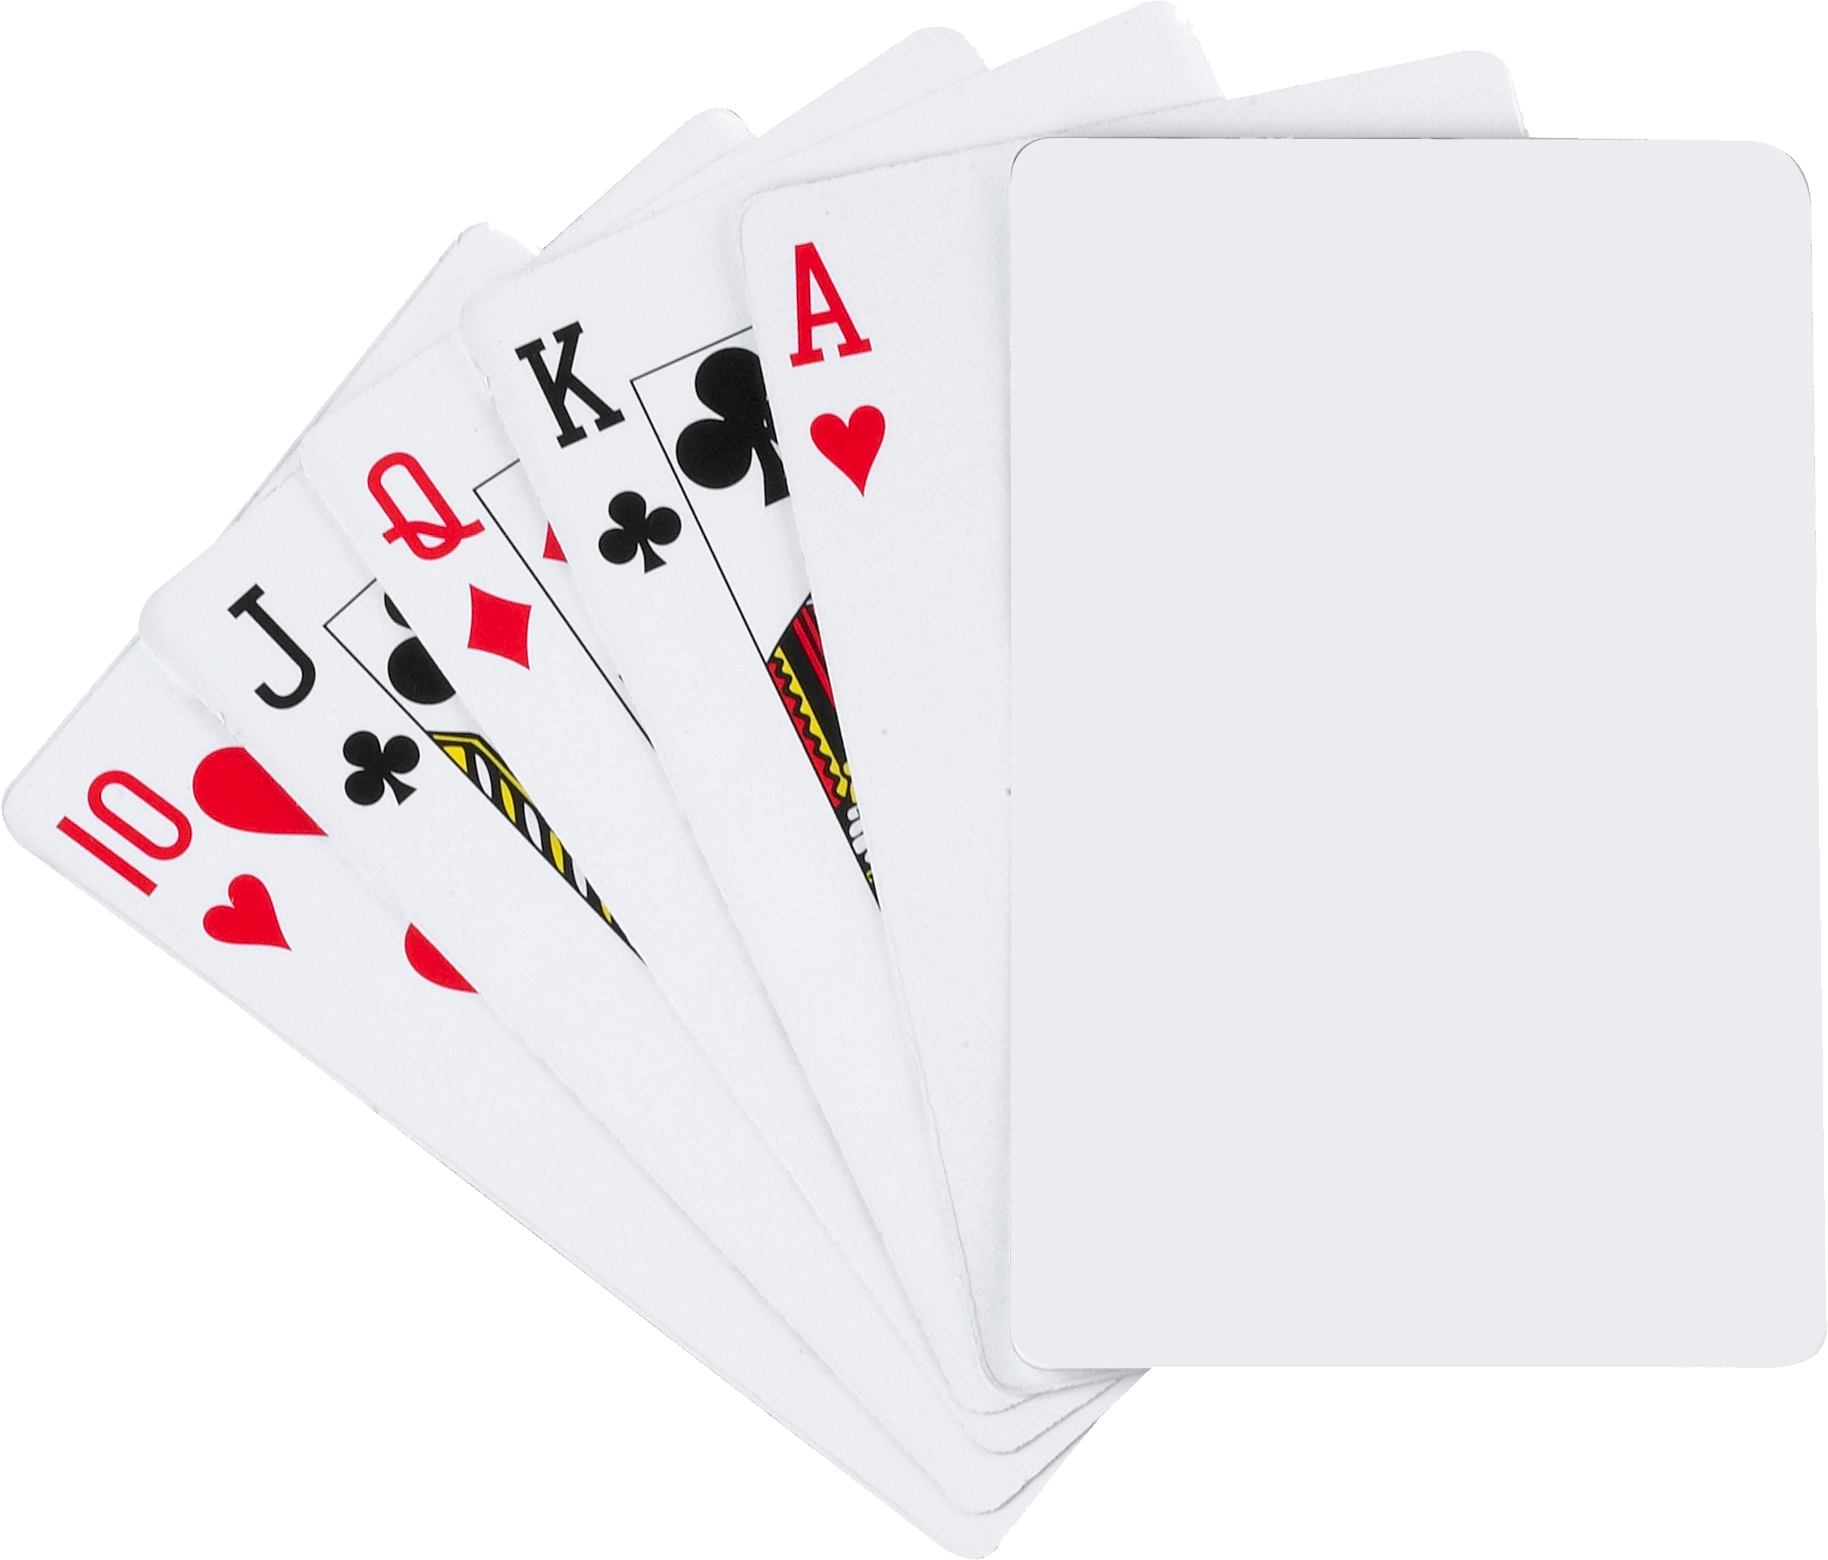 Ace Playing Card PNG Free Download